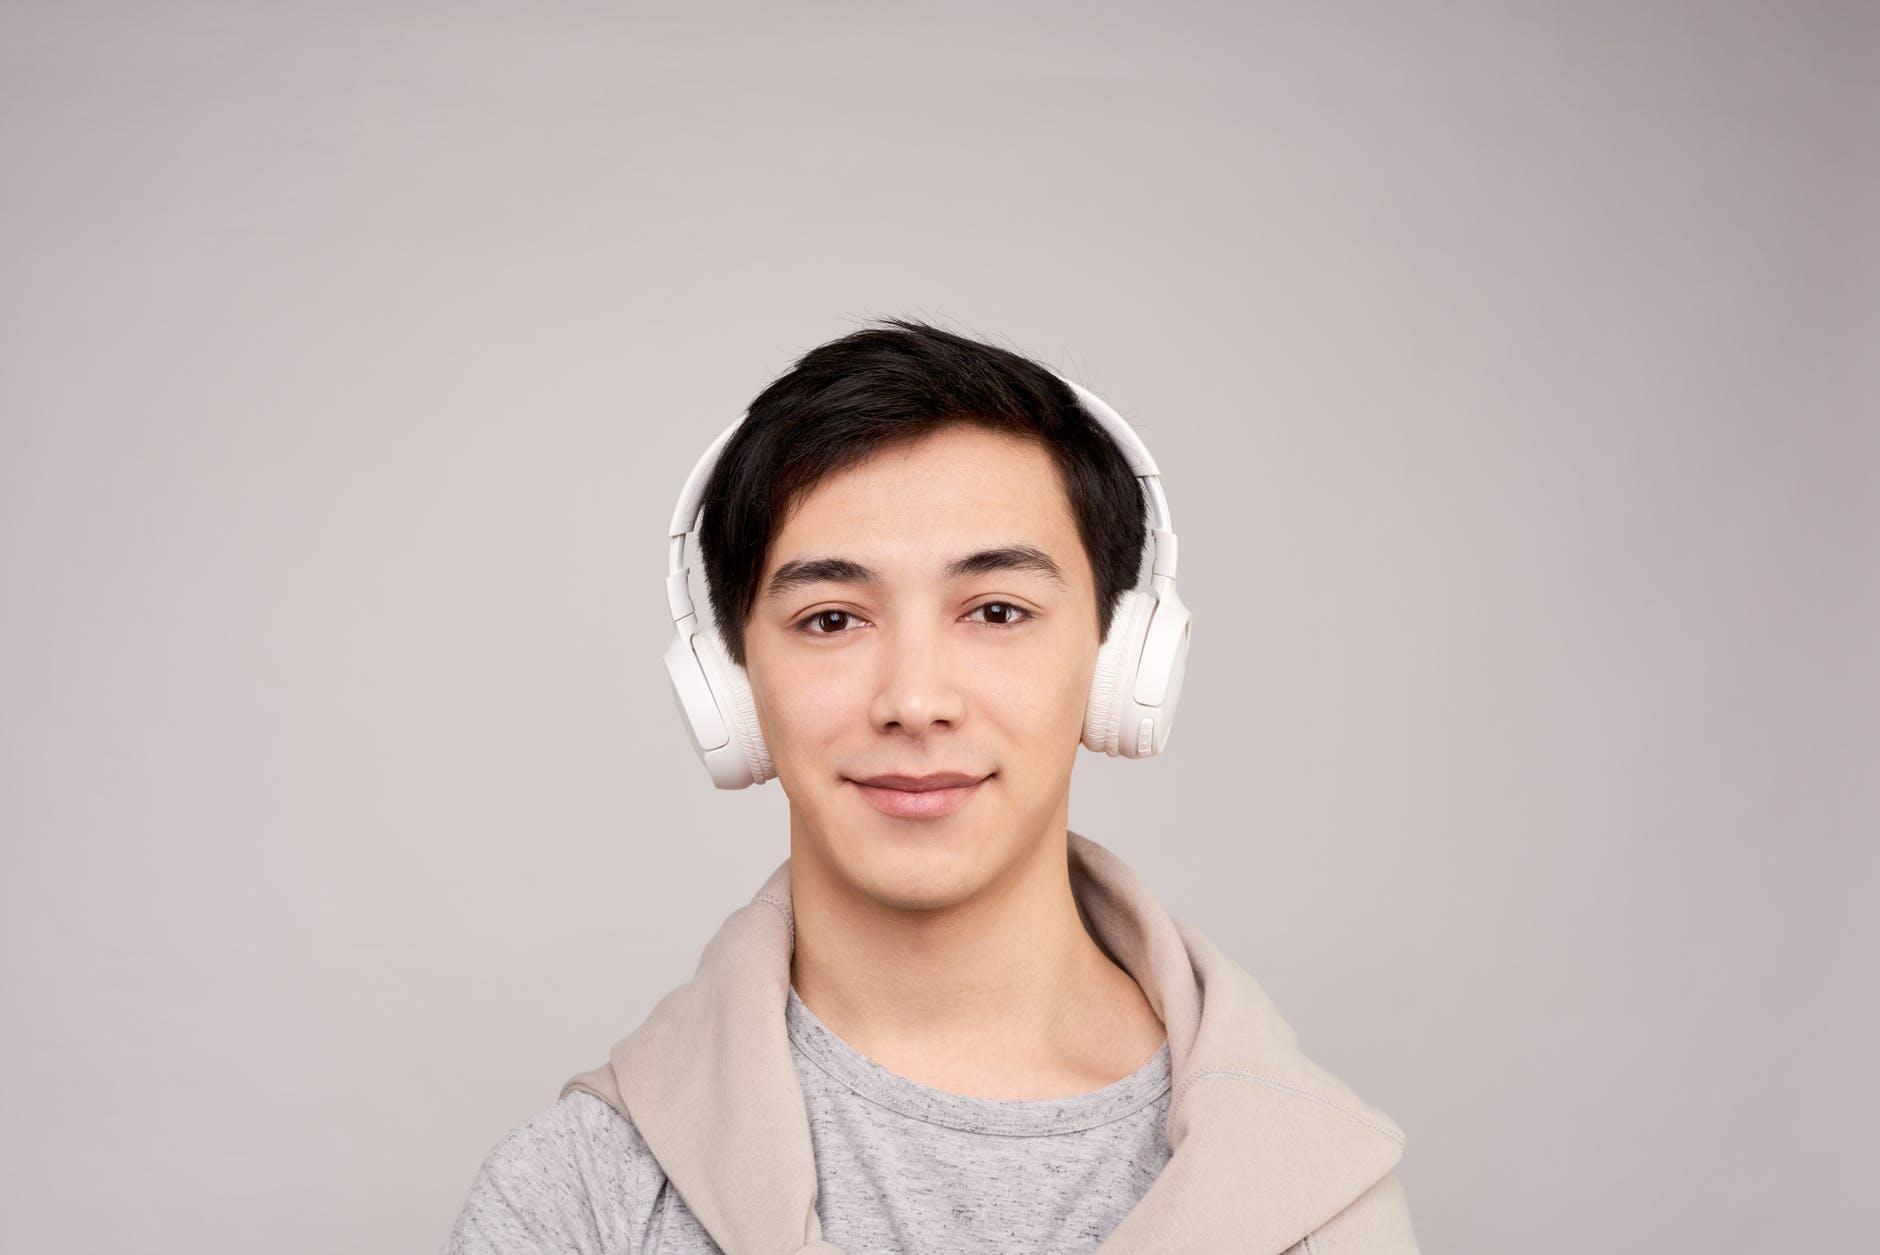 A Bluetooth Headset For Top Sound Quality